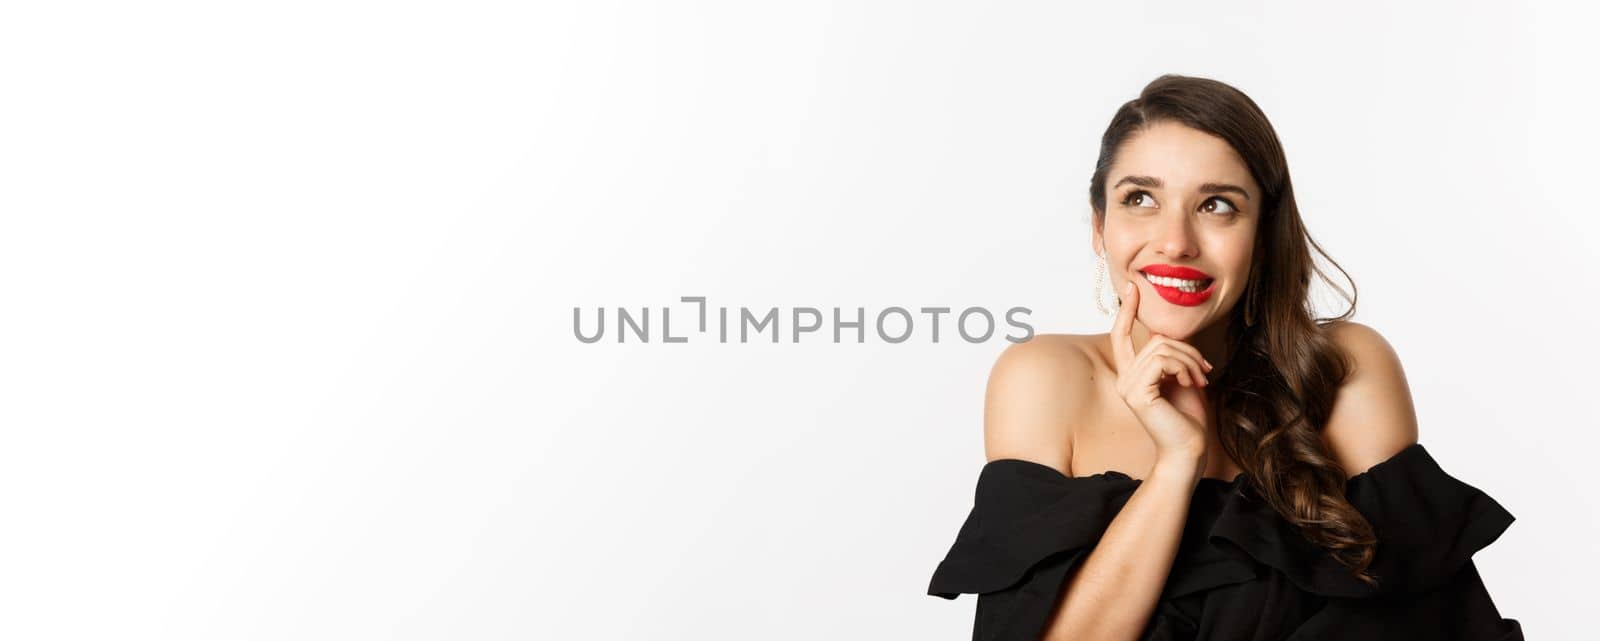 Fashion and beauty concept. Close-up of beautiful dreamy woman with red lips, looking at upper left corner and smiling tempted, having idea, standing over white background.